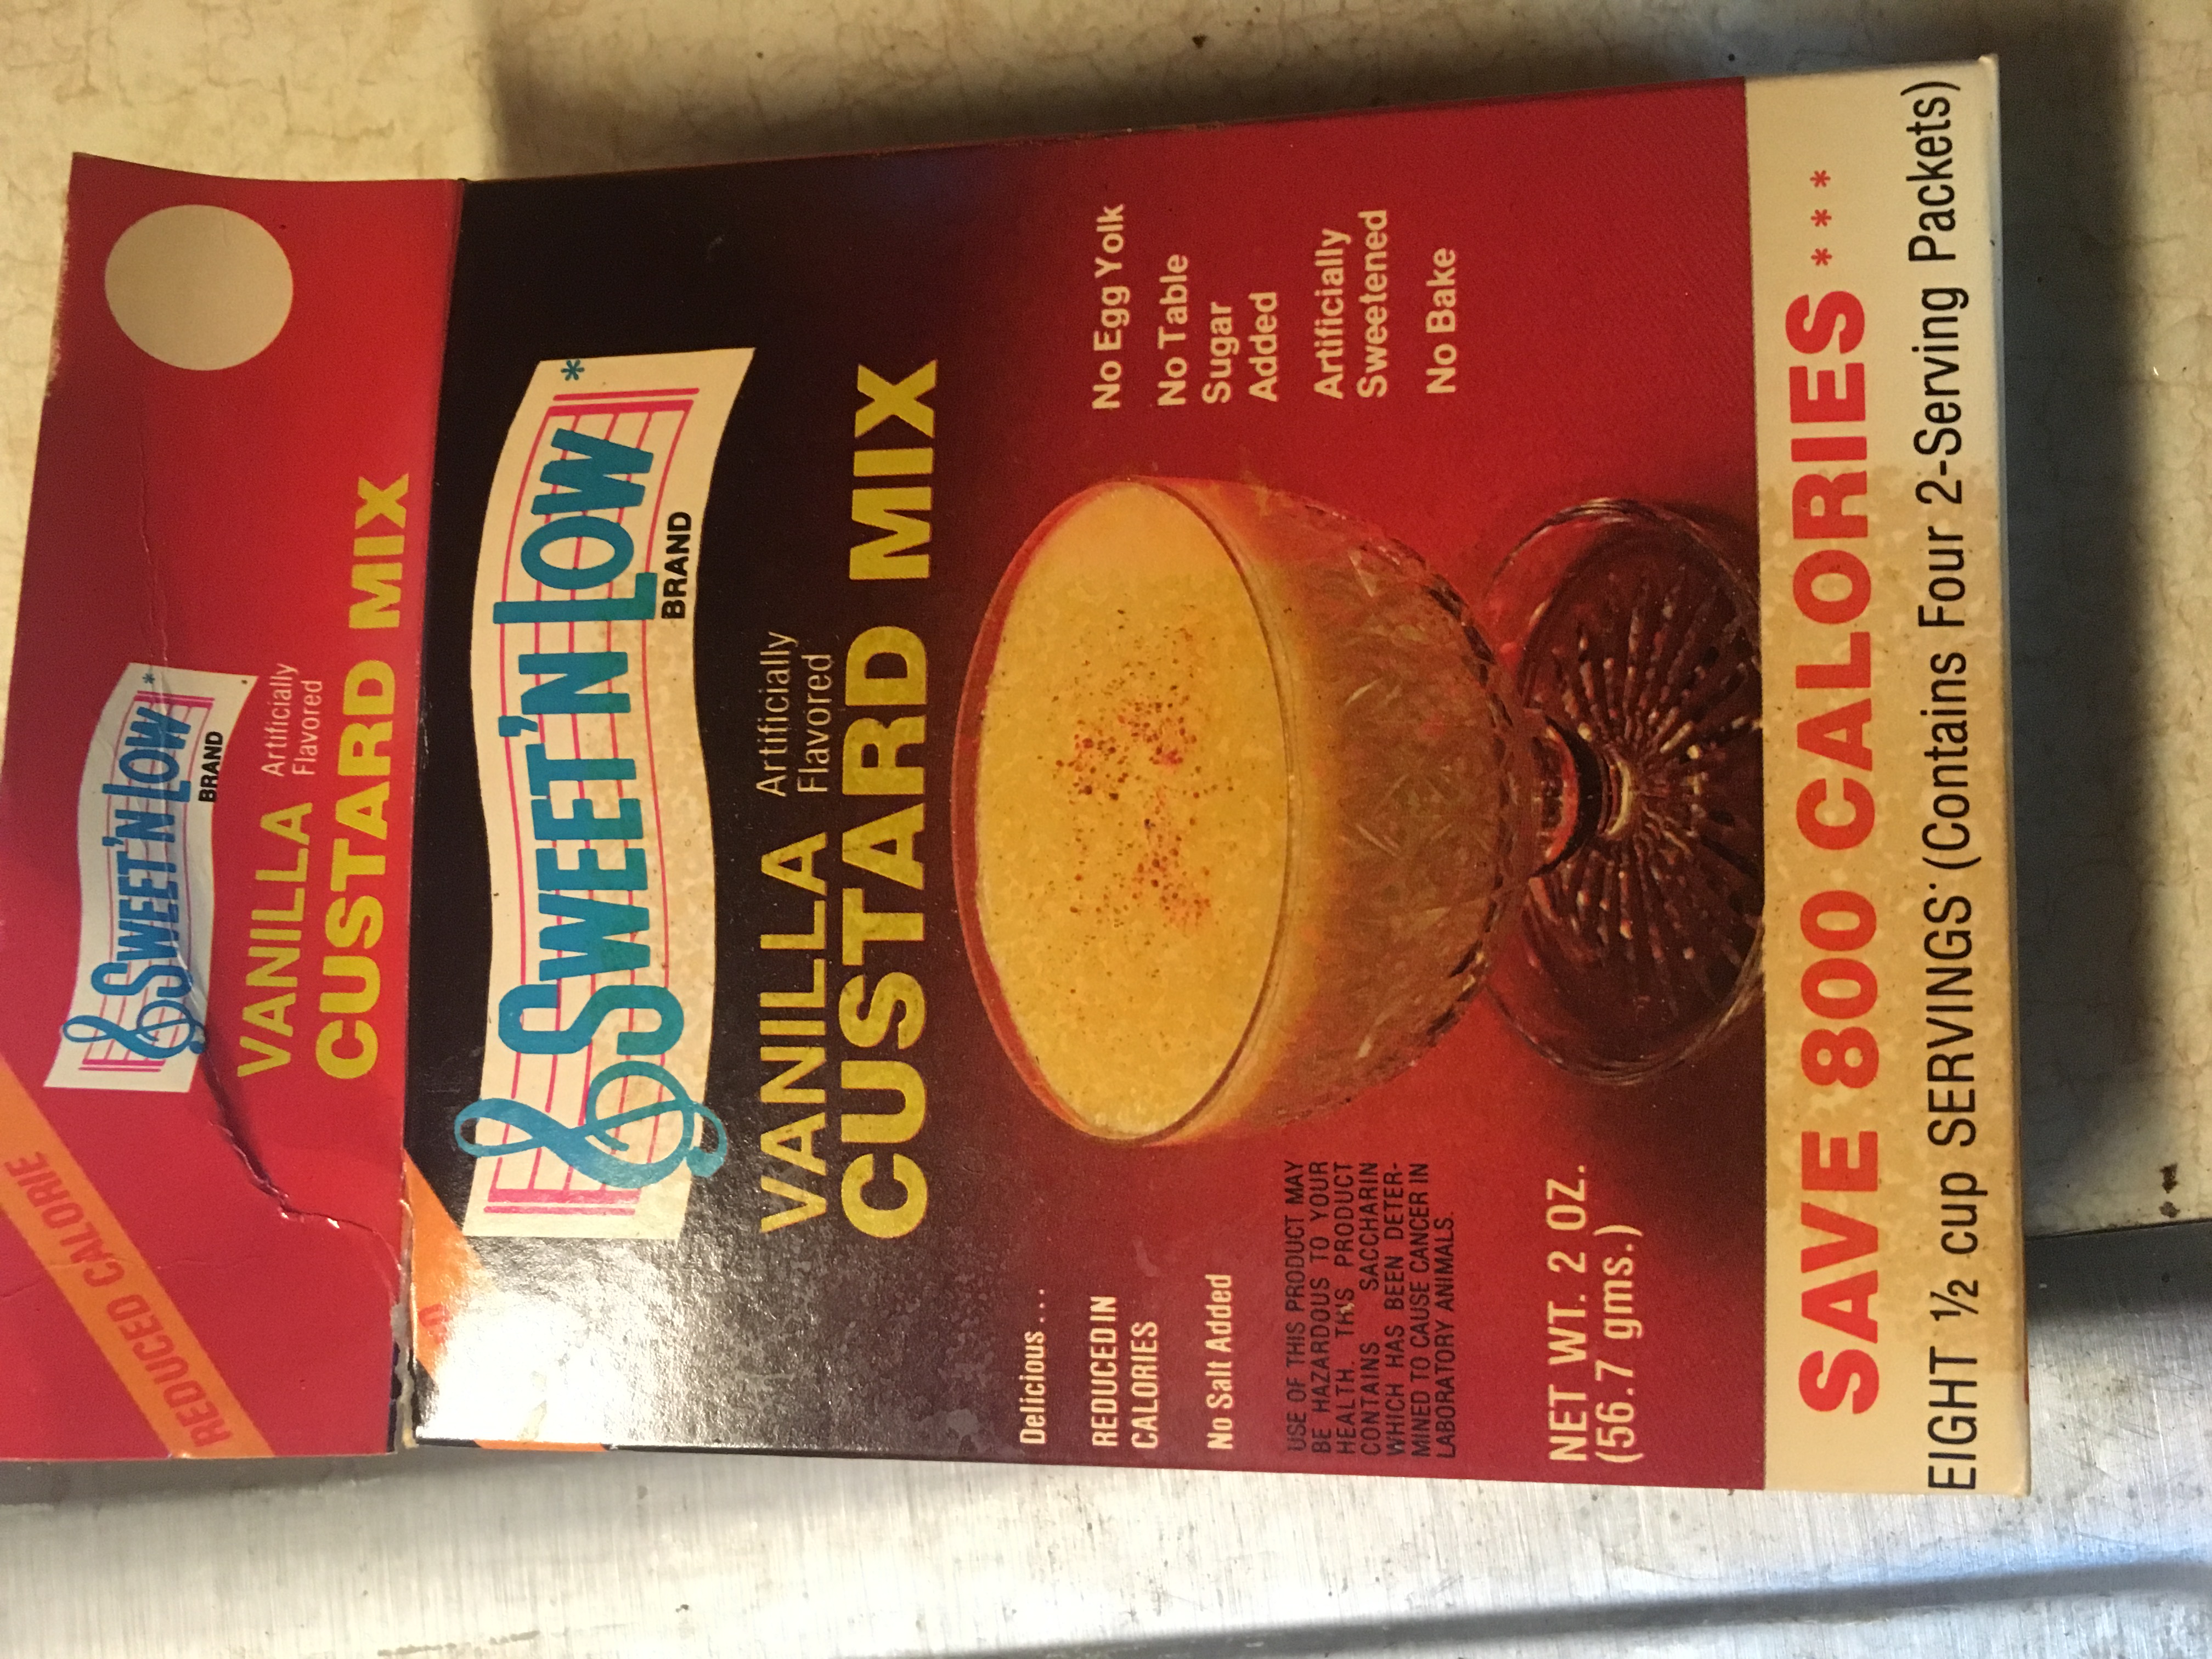 Reduceo Calorie Sweet'N Low Brand Vanilla Custard Mix Sweet'N Low Brand Vanilla Artificially Custard Mix Delicious Reducedin Calories No Salt Added No Egg Yolk No Table Sugar Added Artificially Sweetened No Bake Health Product Contains Acharin Which Has…